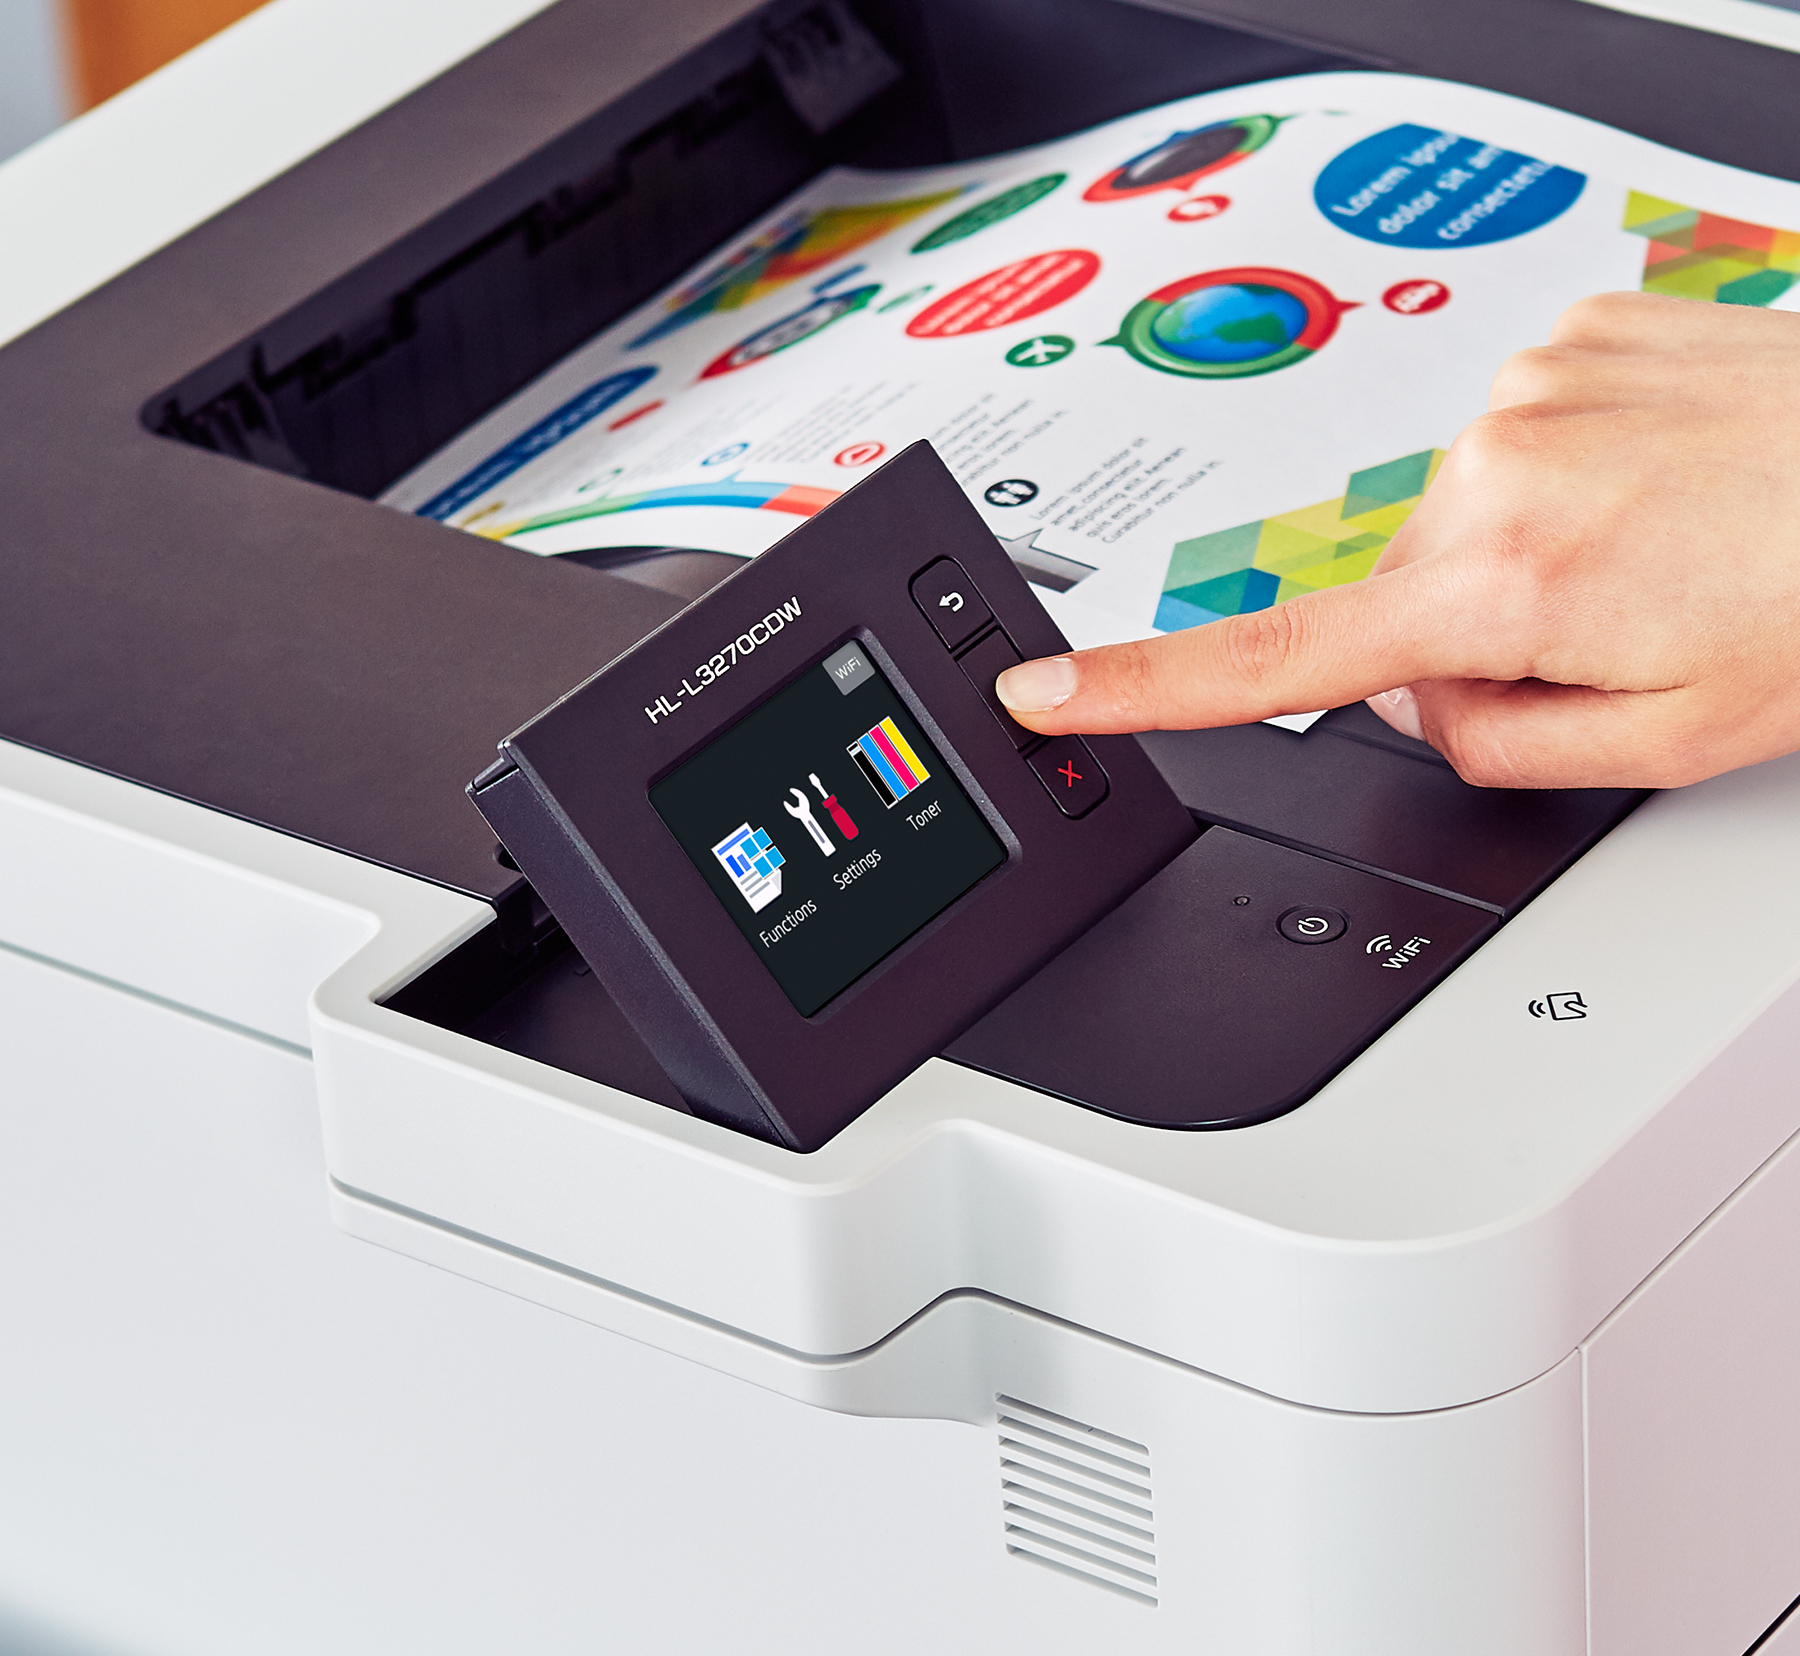 Brother HL-L3270CDW Compact Digital Color Printer Providing Laser Quality Results with NFC, Wireless and Duplex Printing - image 8 of 9